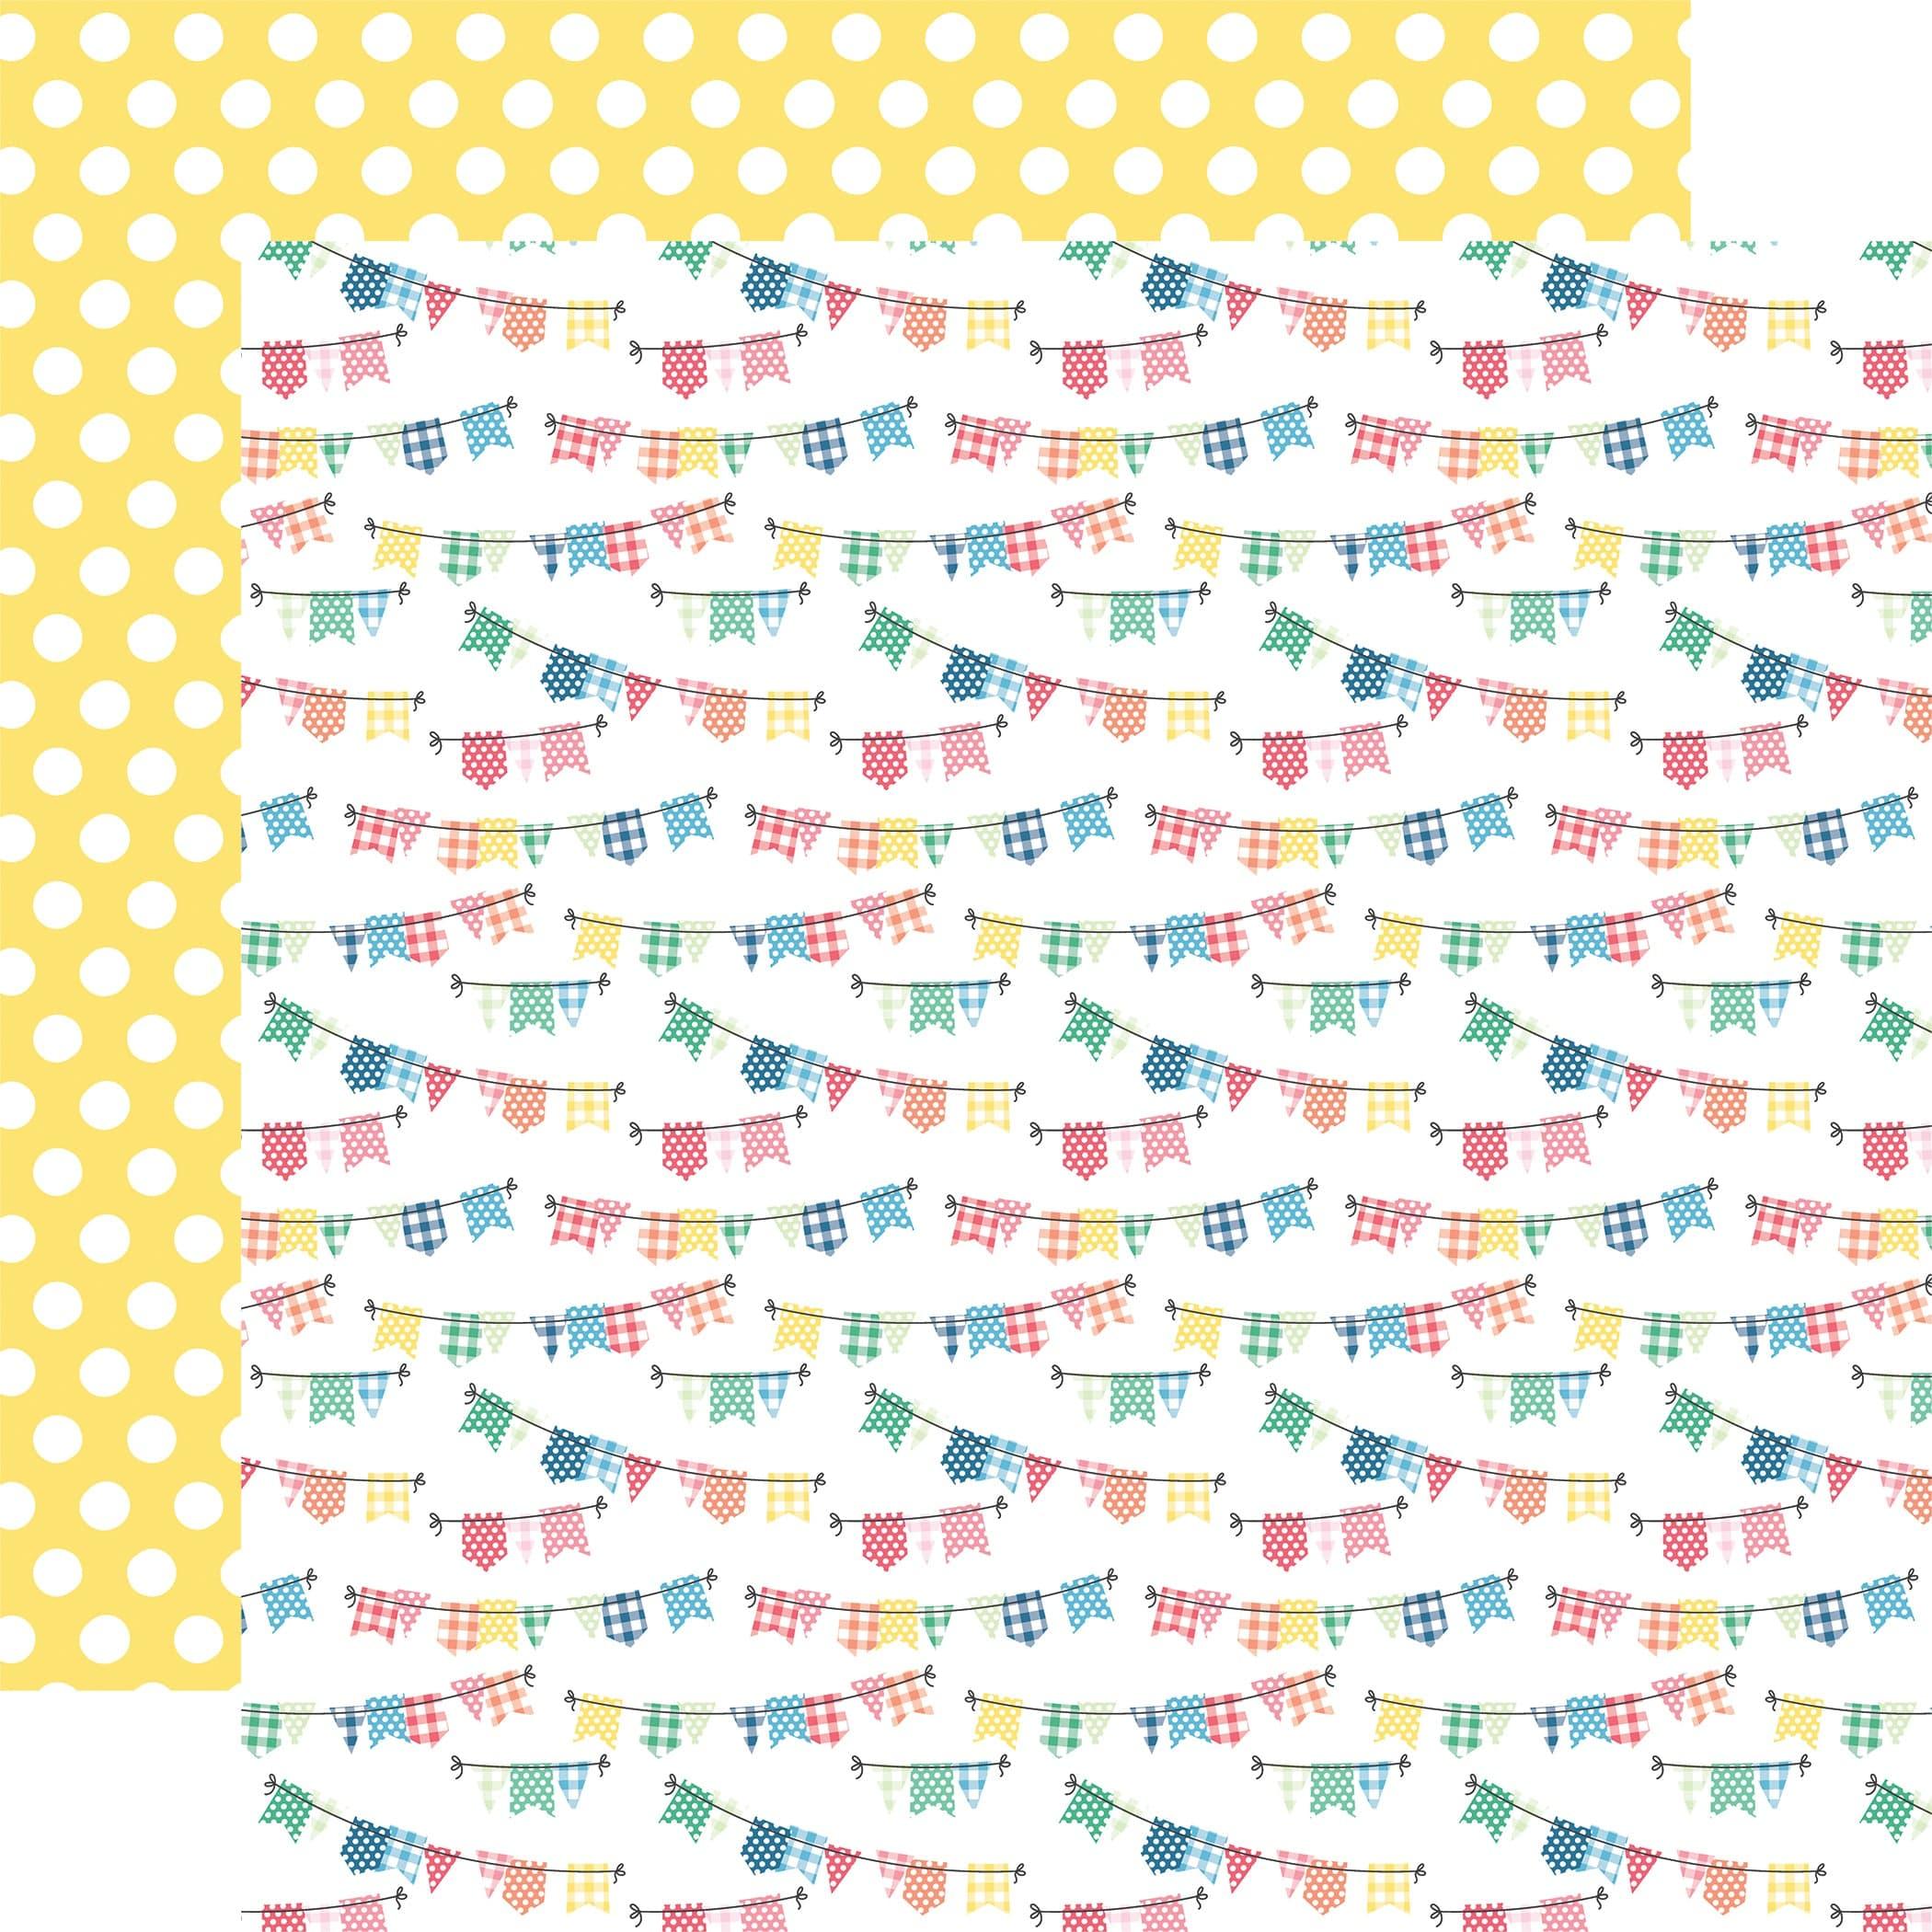 Sun Kissed Collection Happy Banners 12 x 12 Double-Sided Scrapbook Paper by Echo Park Paper